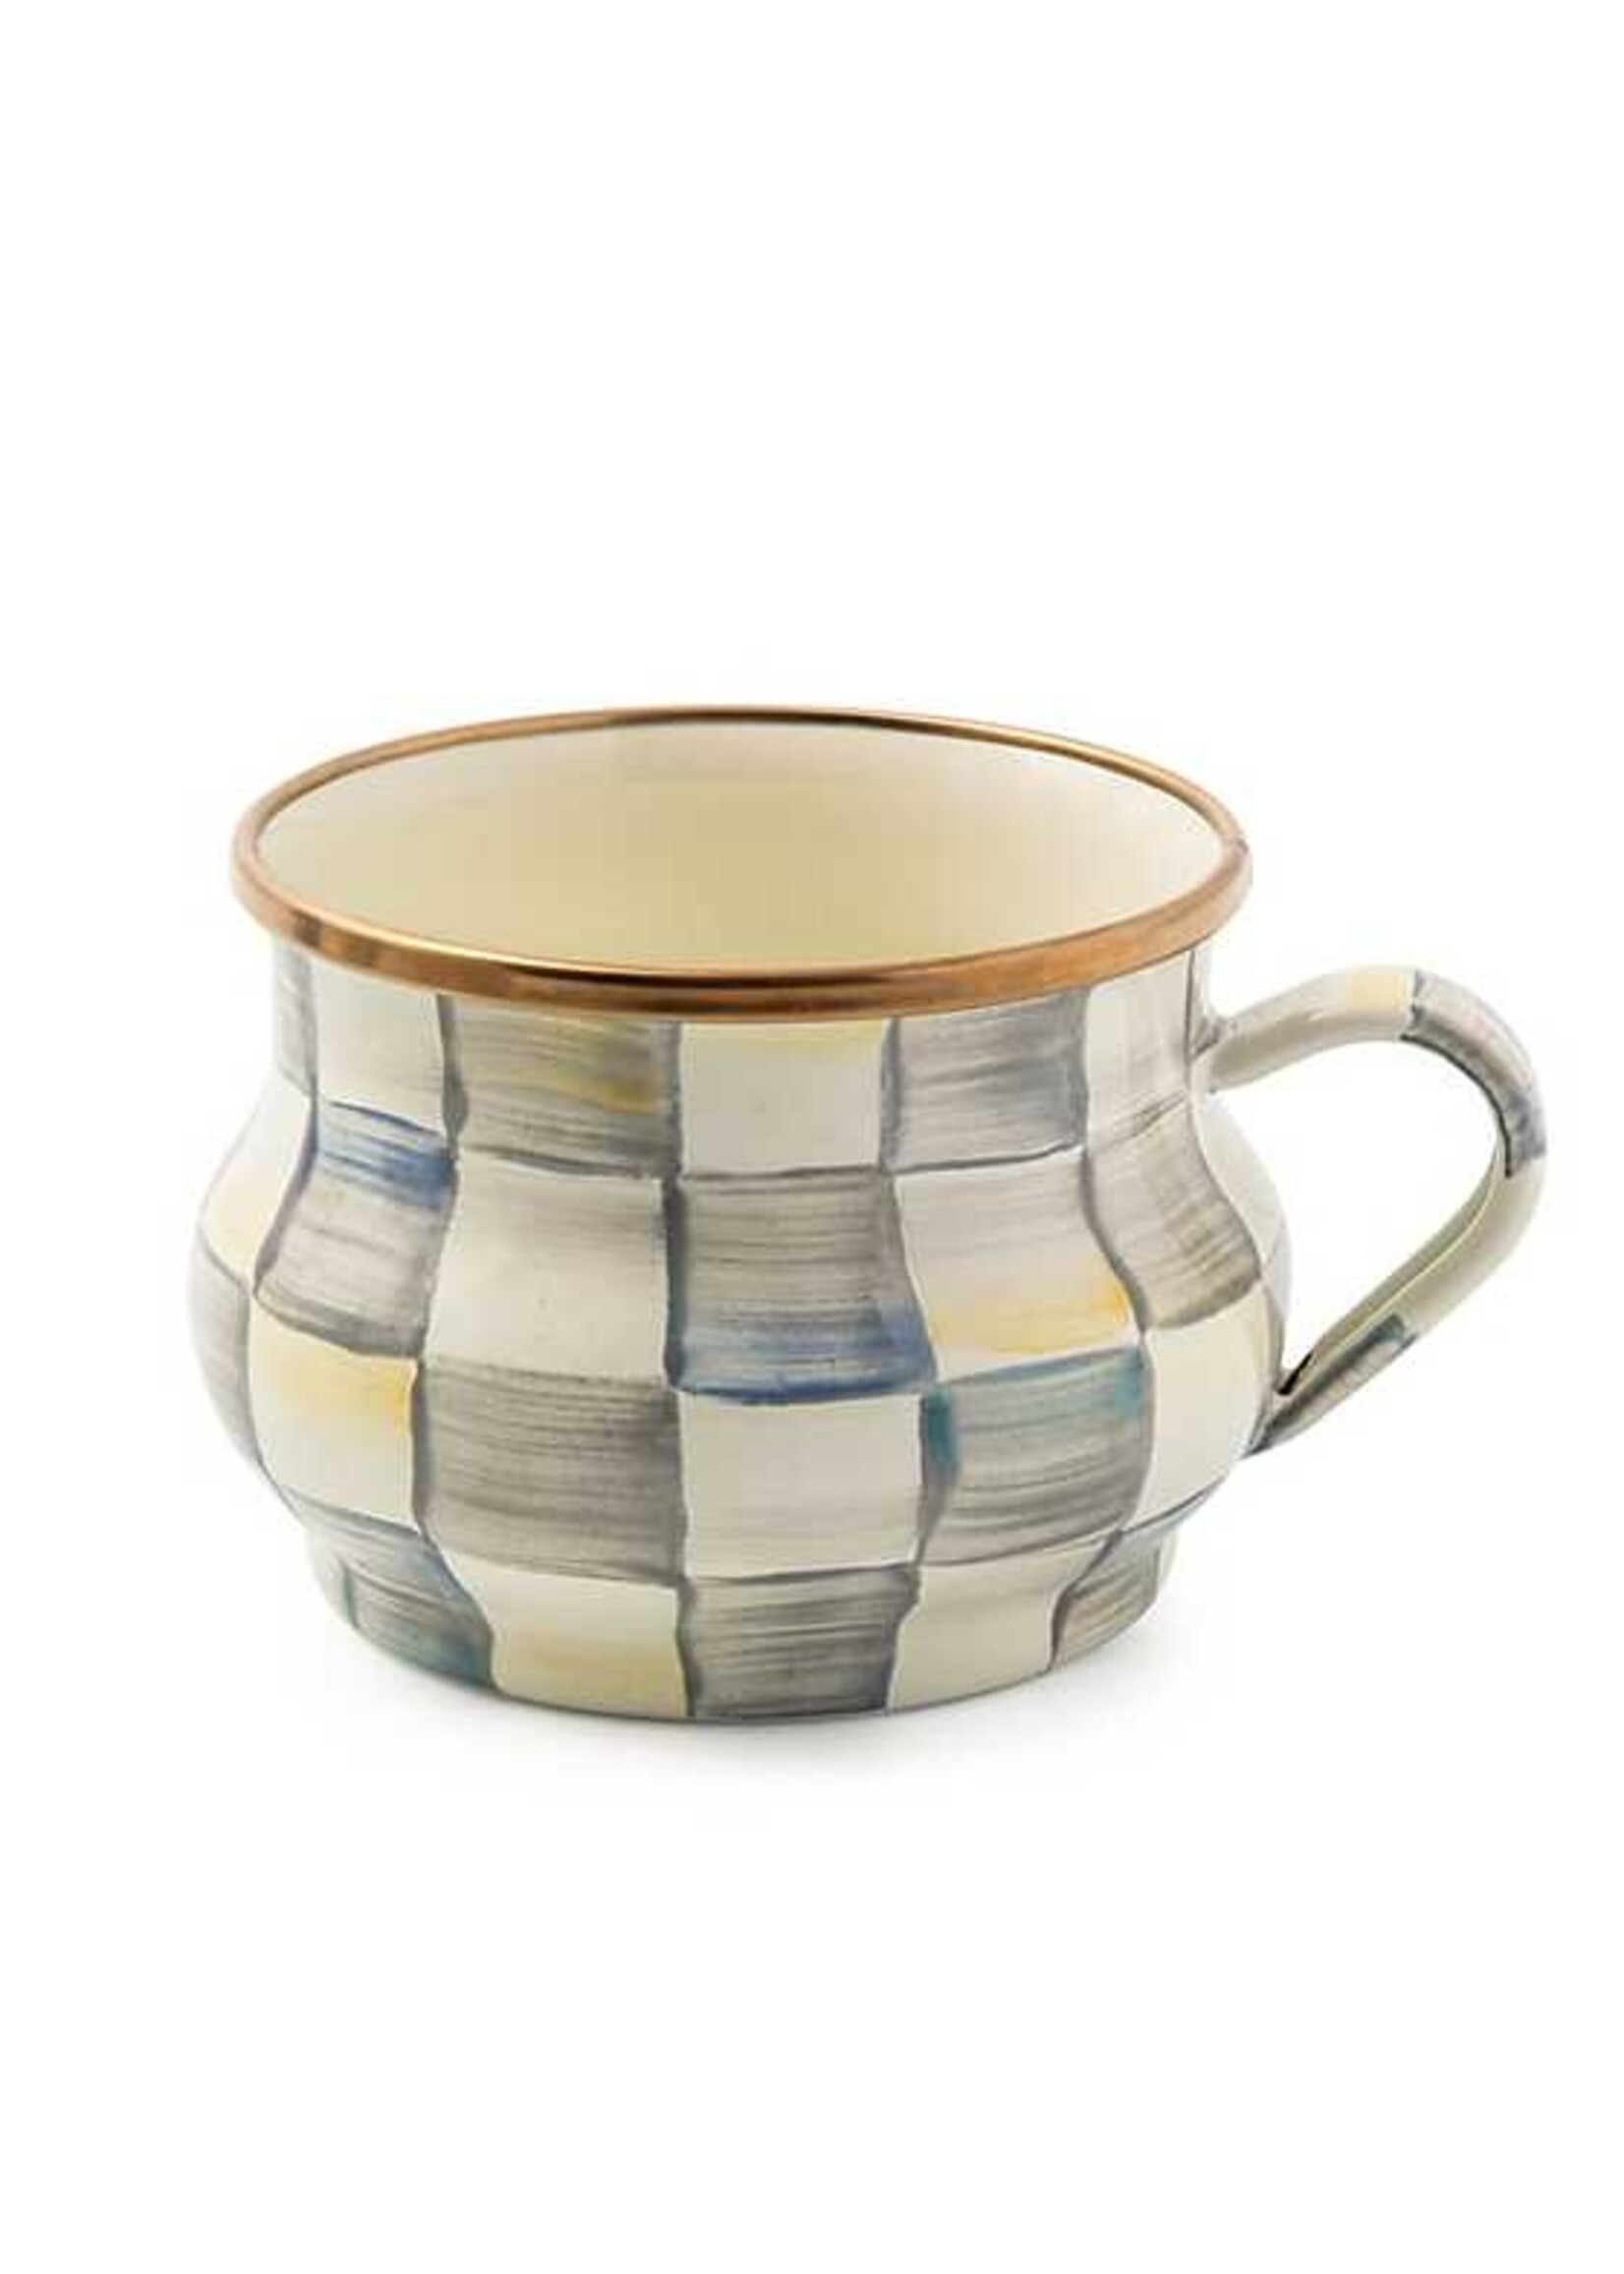 MacKenzie-Childs Sterling Check Teacup